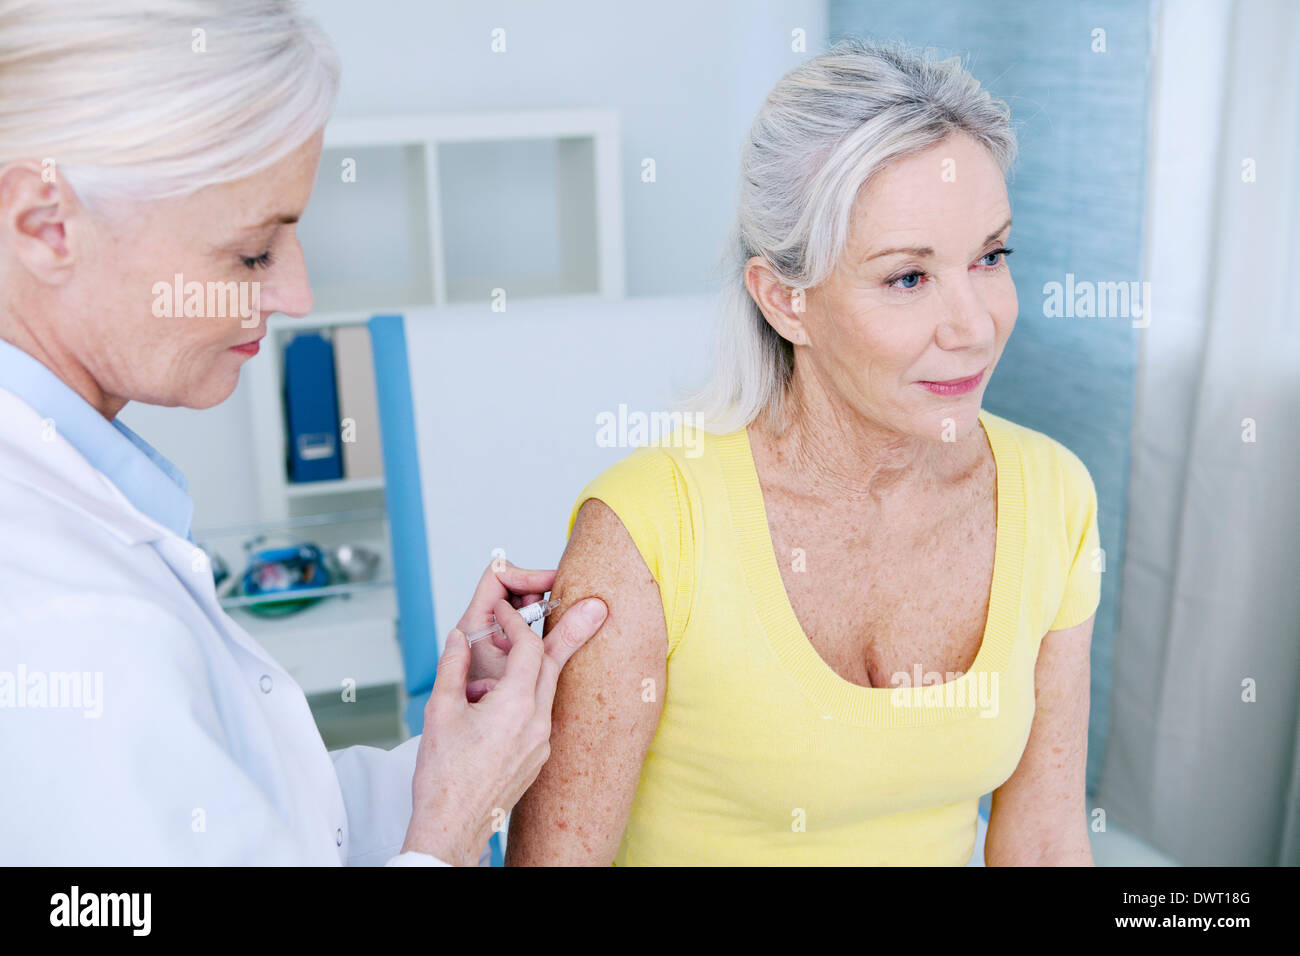 Vaccinating an elderly person Stock Photo